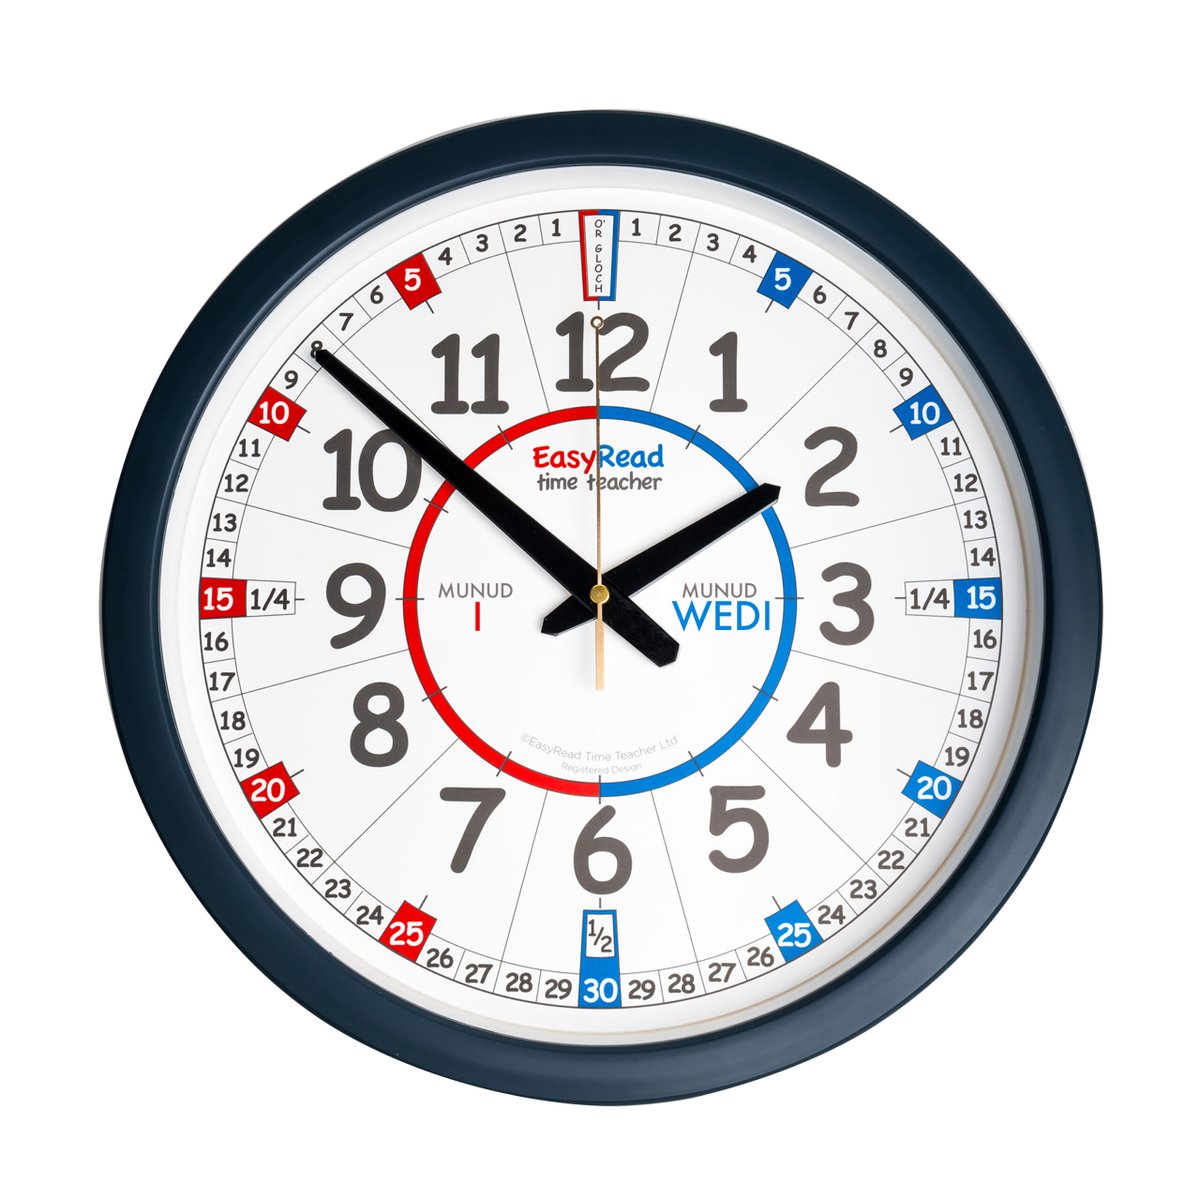 Interested in exploring how other cultures learn to tell the time? 🌍 Here’s our guide: easyreadtimeteacher.com/news/how-other… 
#timeteaching #timeteachingresources #timetelling #tellingtime #childdevelopment #funlearning